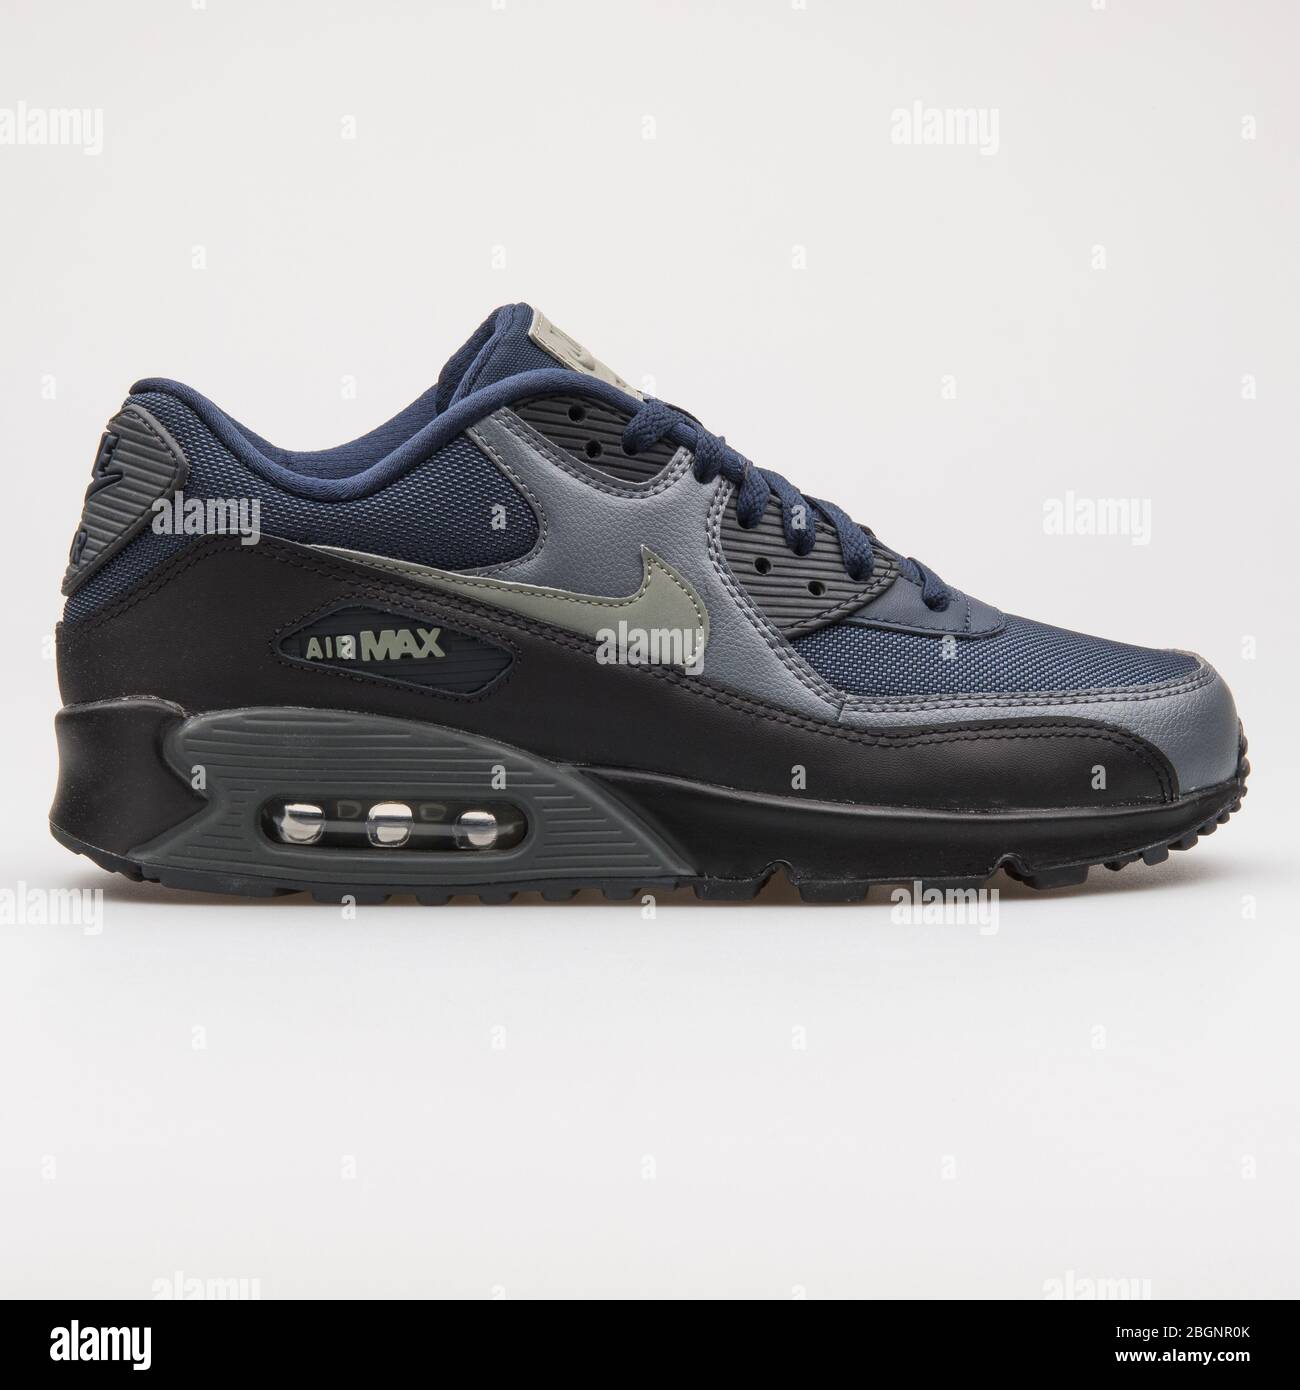 VIENNA, AUSTRIA - AUGUST 22, 2017: Nike Air Max 90 Essential blue, grey and  black sneaker on white background Stock Photo - Alamy